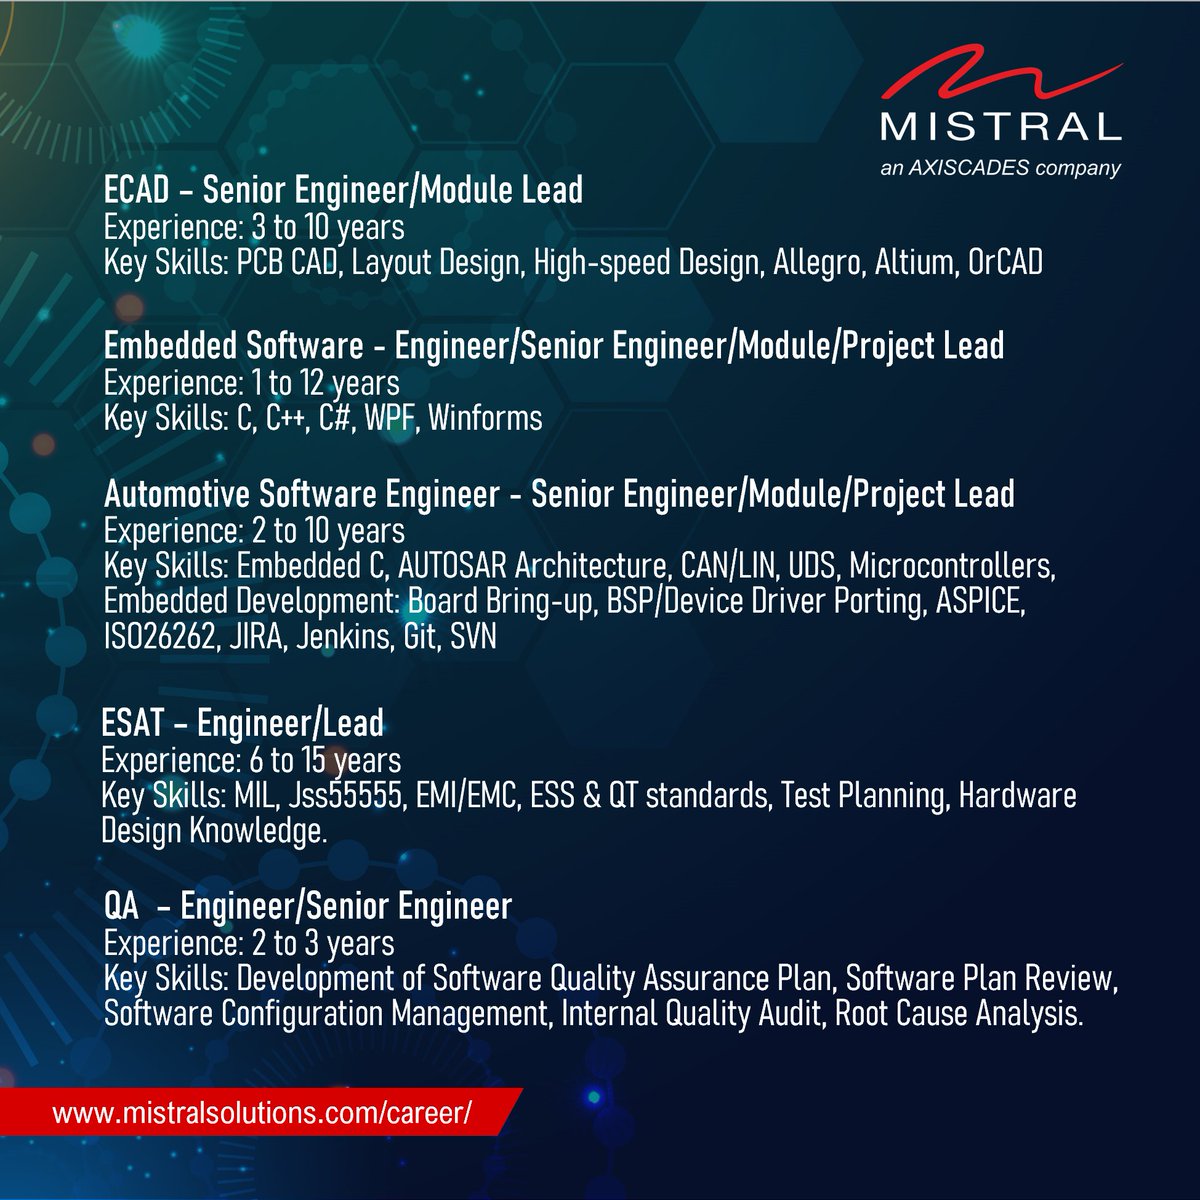 Mistral is currently seeking experienced Engineers for various roles at multiple levels. If you're passionate about embedded engineering, fill out the google form - lnkd.in/gPar9rdj You may also visit our career page to view current vacancies! lnkd.in/gNvGNT5i